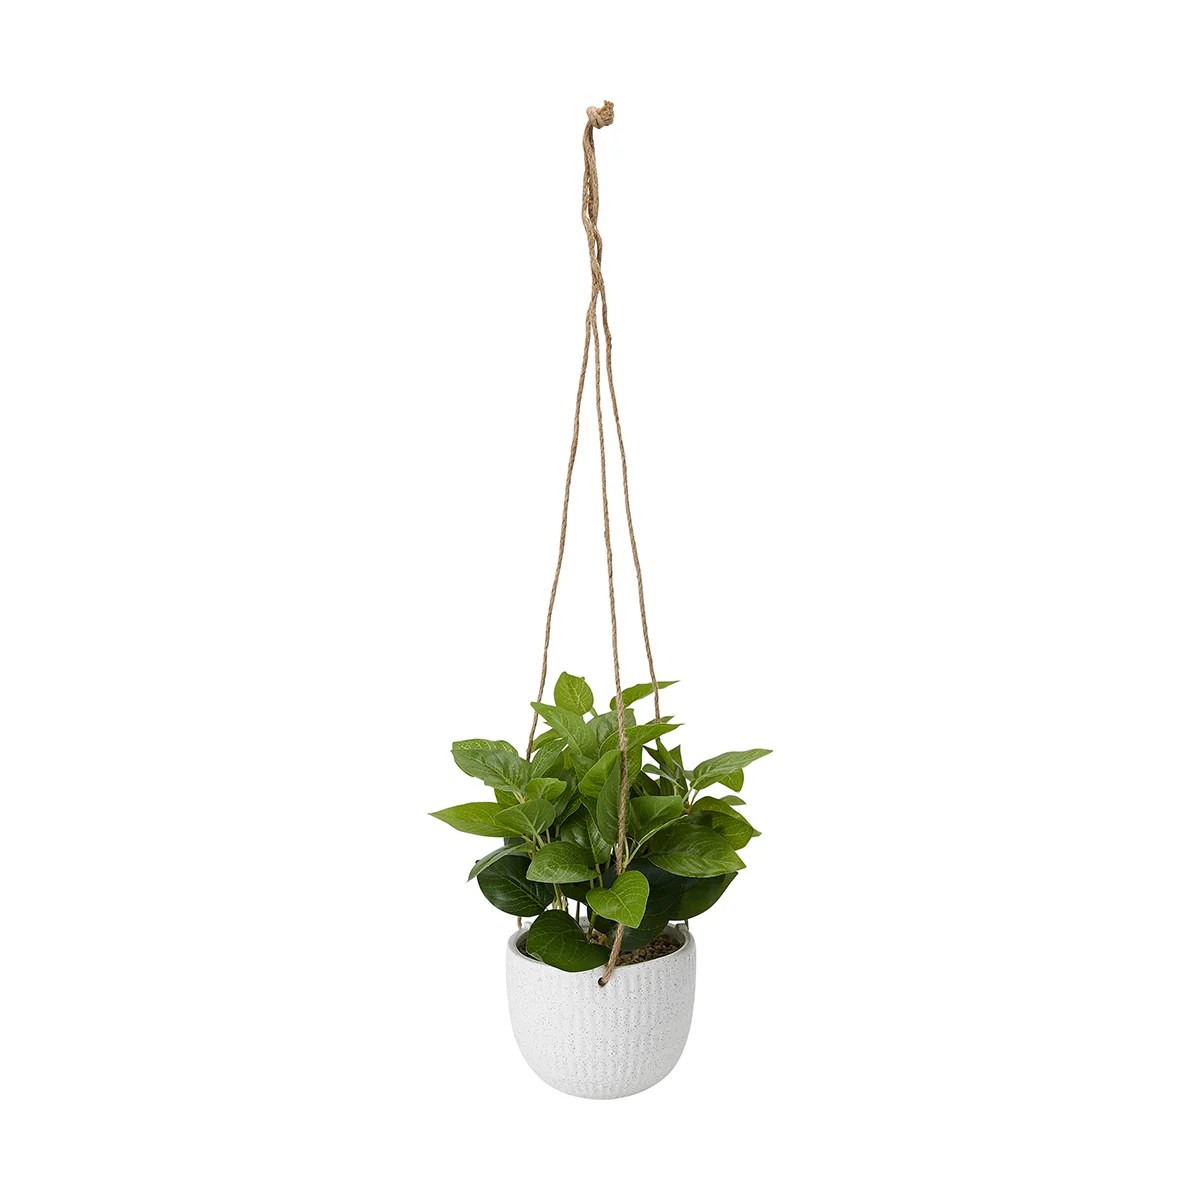 Hanging Plants Indoor | Discover the Top 10 Hanging Plants at Kmart for a Greener, Healthier Home